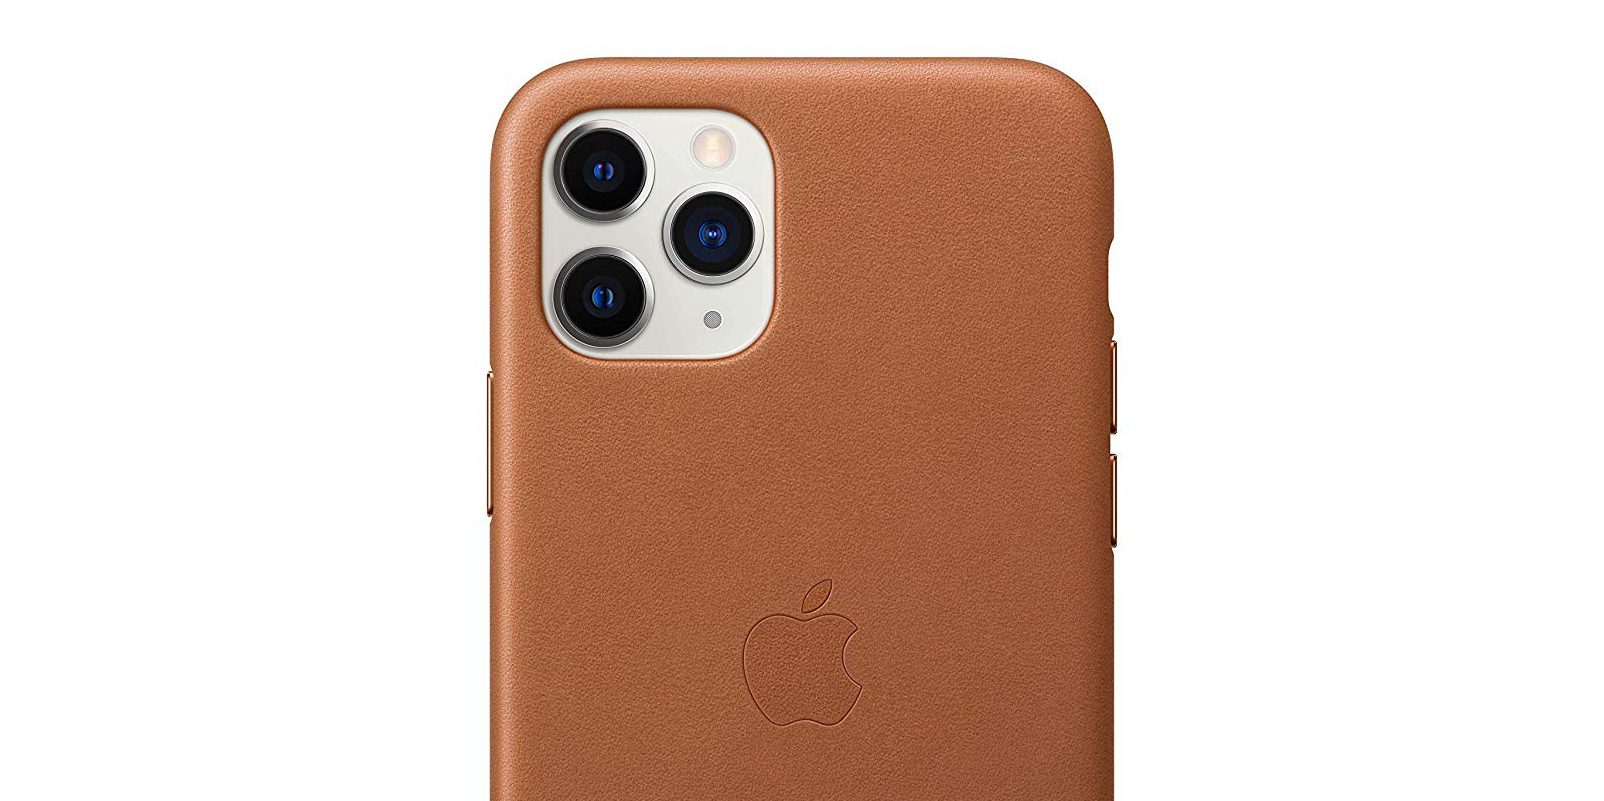 iPhone 11 Pro leather cases on sale, plus iPhone 8 deals, more - 9to5Mac